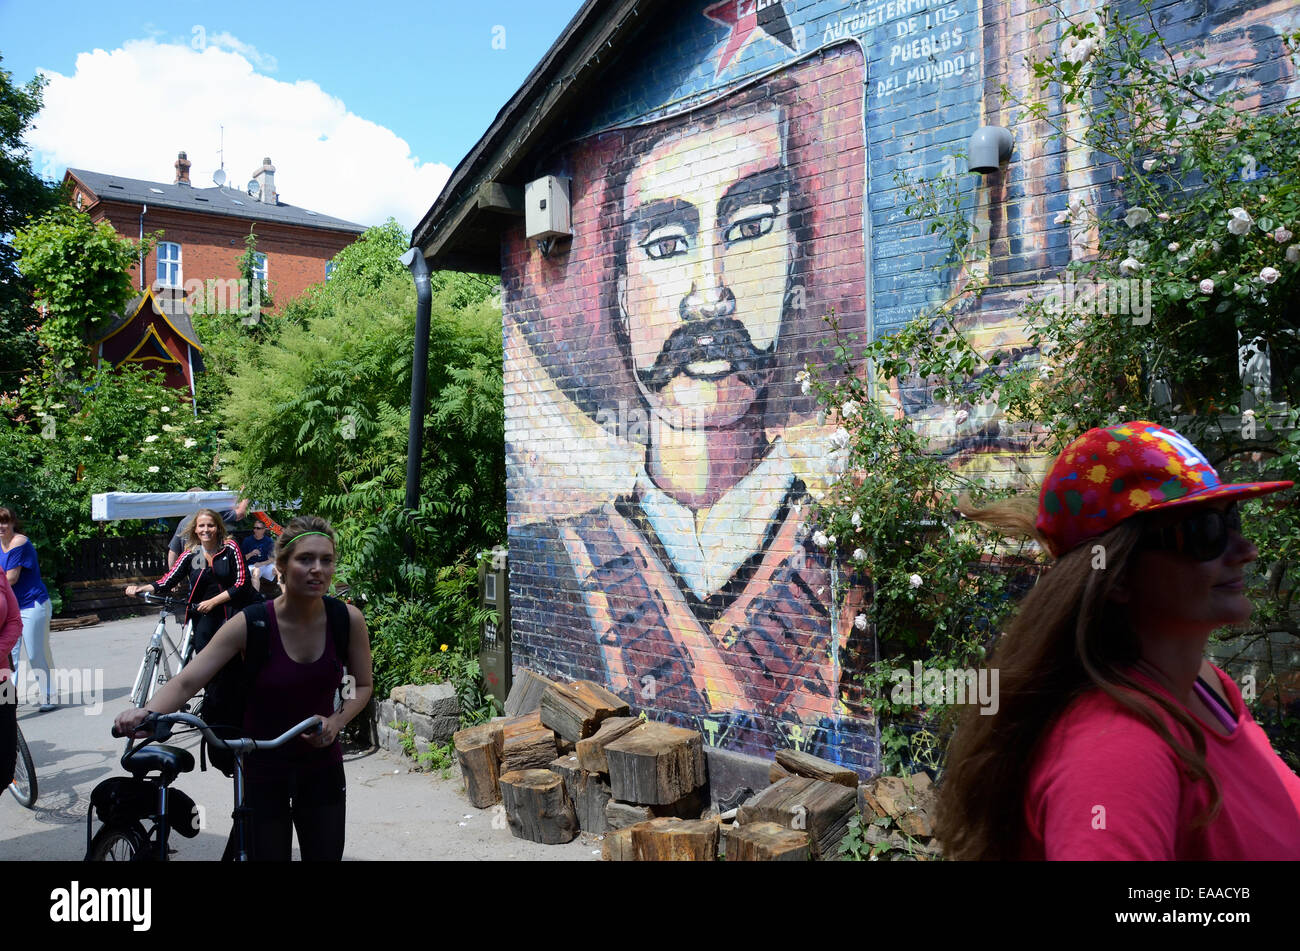 christiania free town copenhagen self proclaimed autonomous enclave of 900 people founded in 1971 in a disused danish army camp. Stock Photo